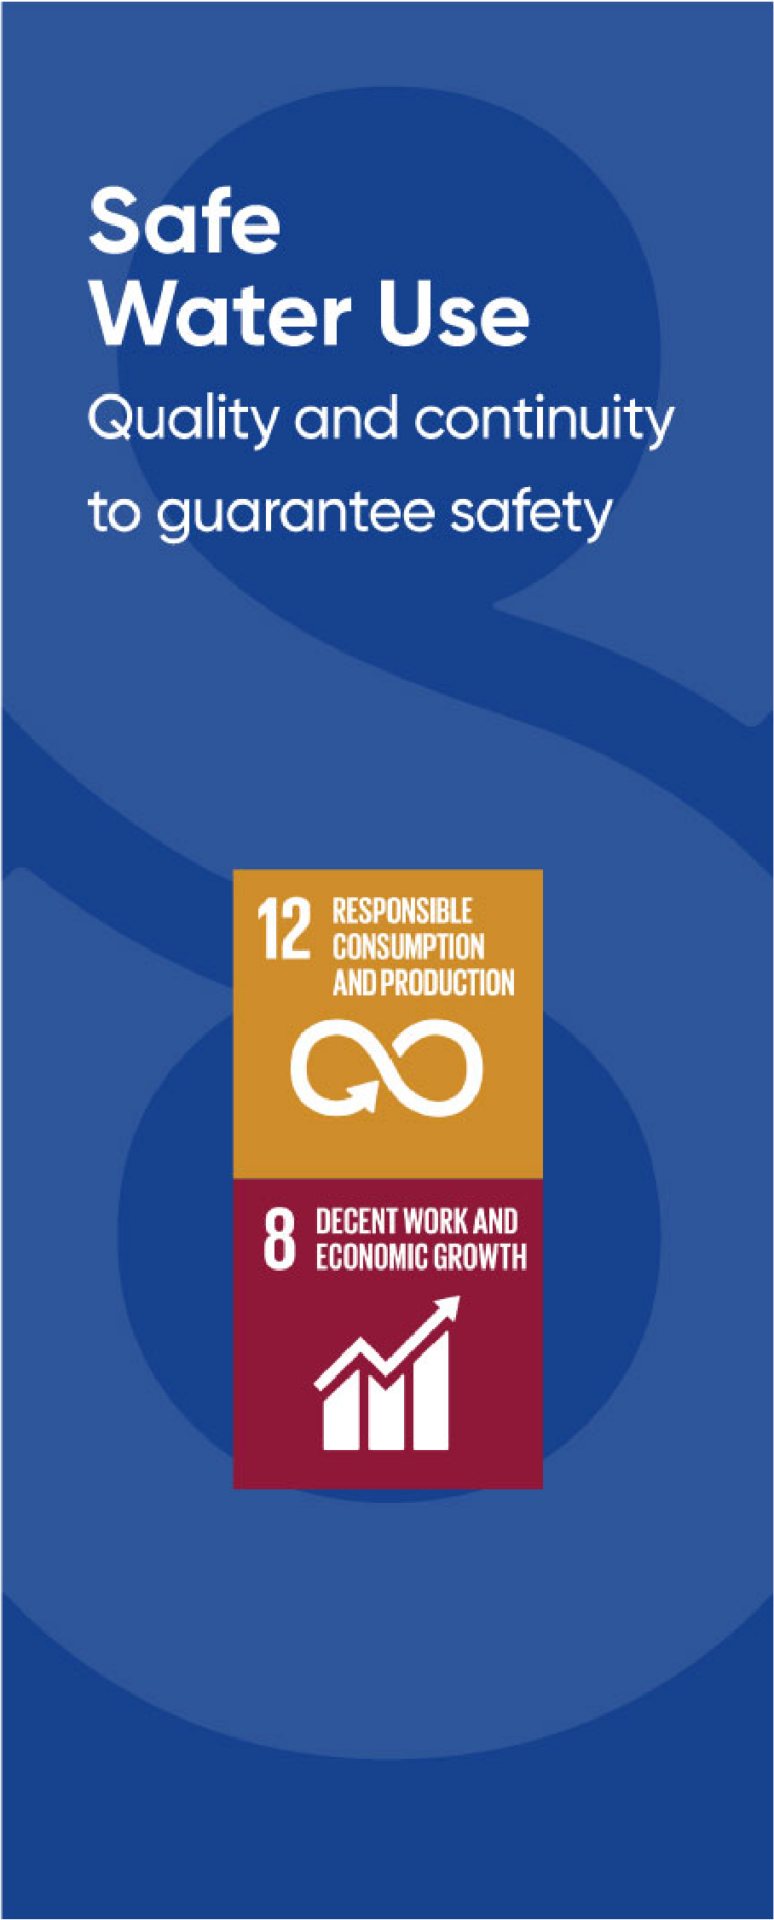 Symbols of some sustainability pillars: Responsible consumption and production, decent work and economic growth.